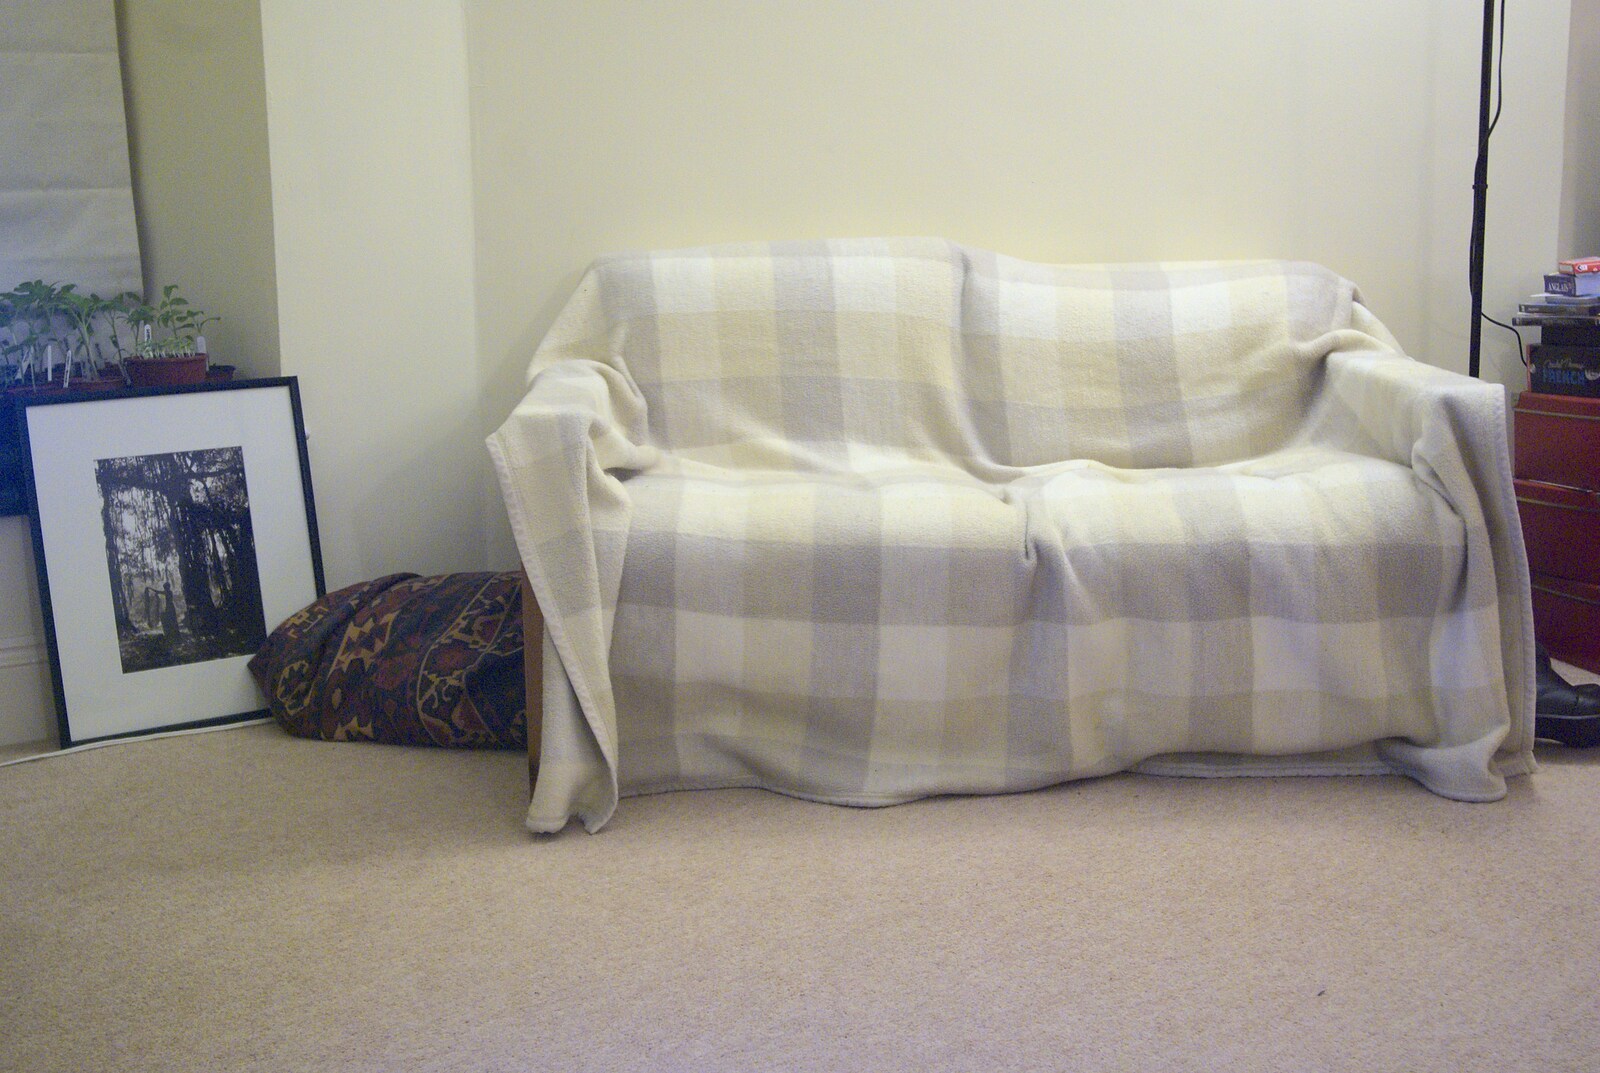 A covered sofa from Easter in Chagford and Hoo Meavy, Devon - 3rd April 2010